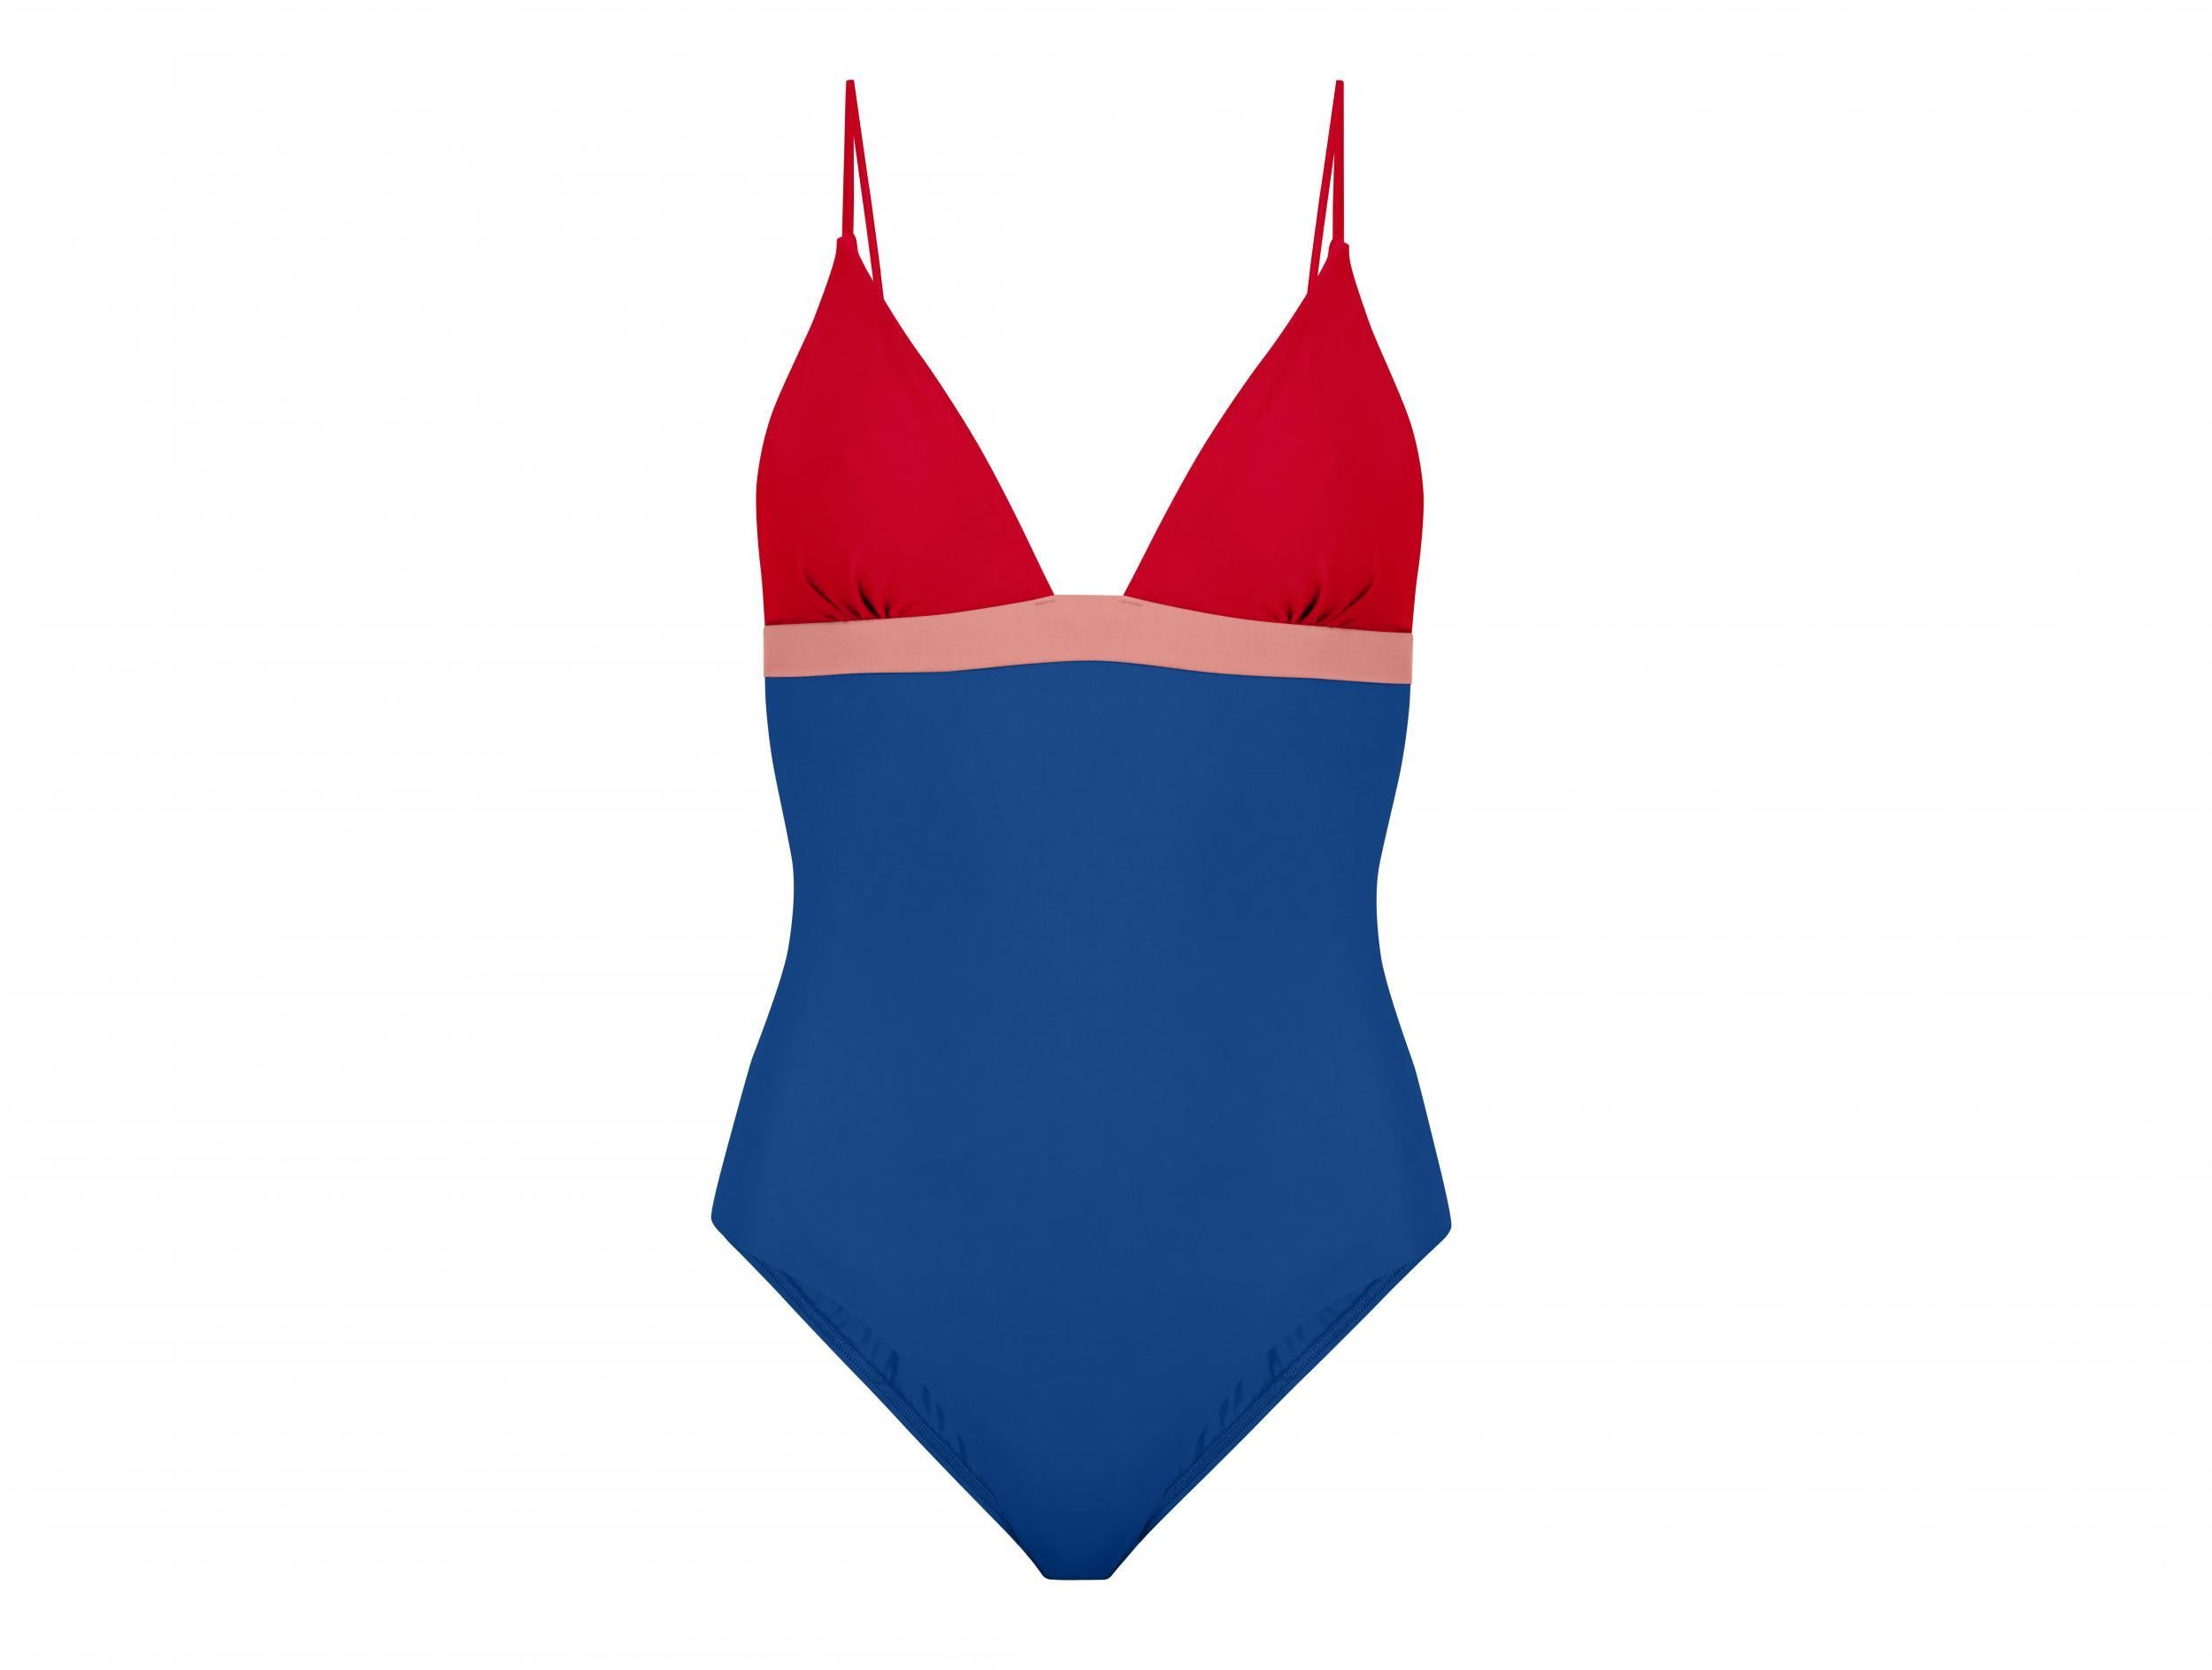 This sustainable swimsuit is stylish and eco-friendly (